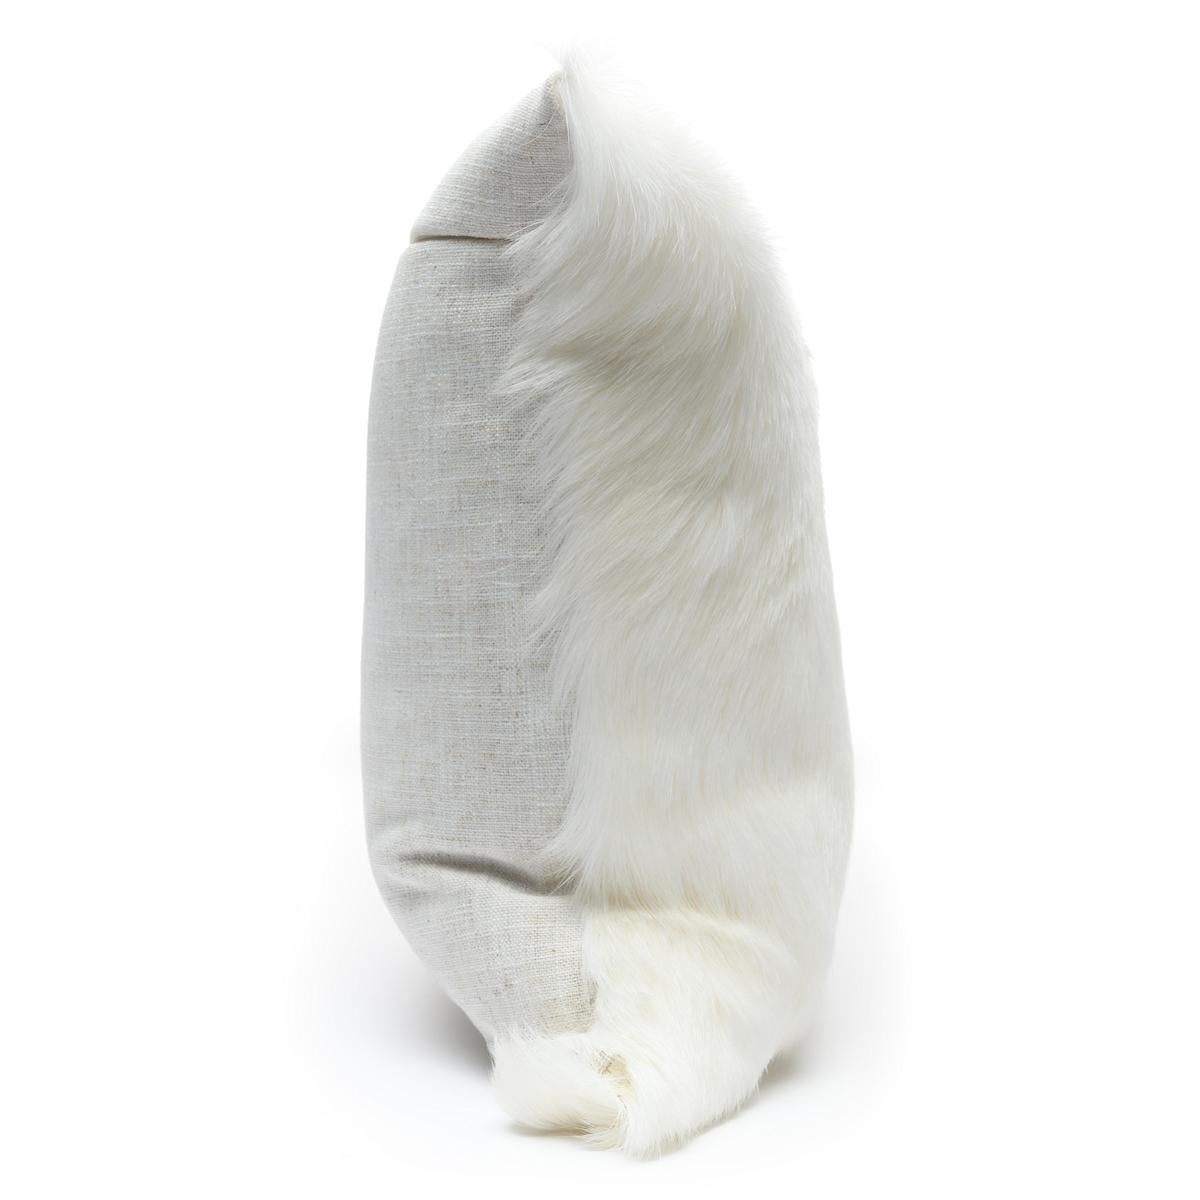 Add soft tactile elements to a chair or sofa with this natural white goat hair pillow. Australian designer, Emily Barbara personally selects each goat skin so that each cushion captures the natural beauty of each goat hide used. Featuring beautiful